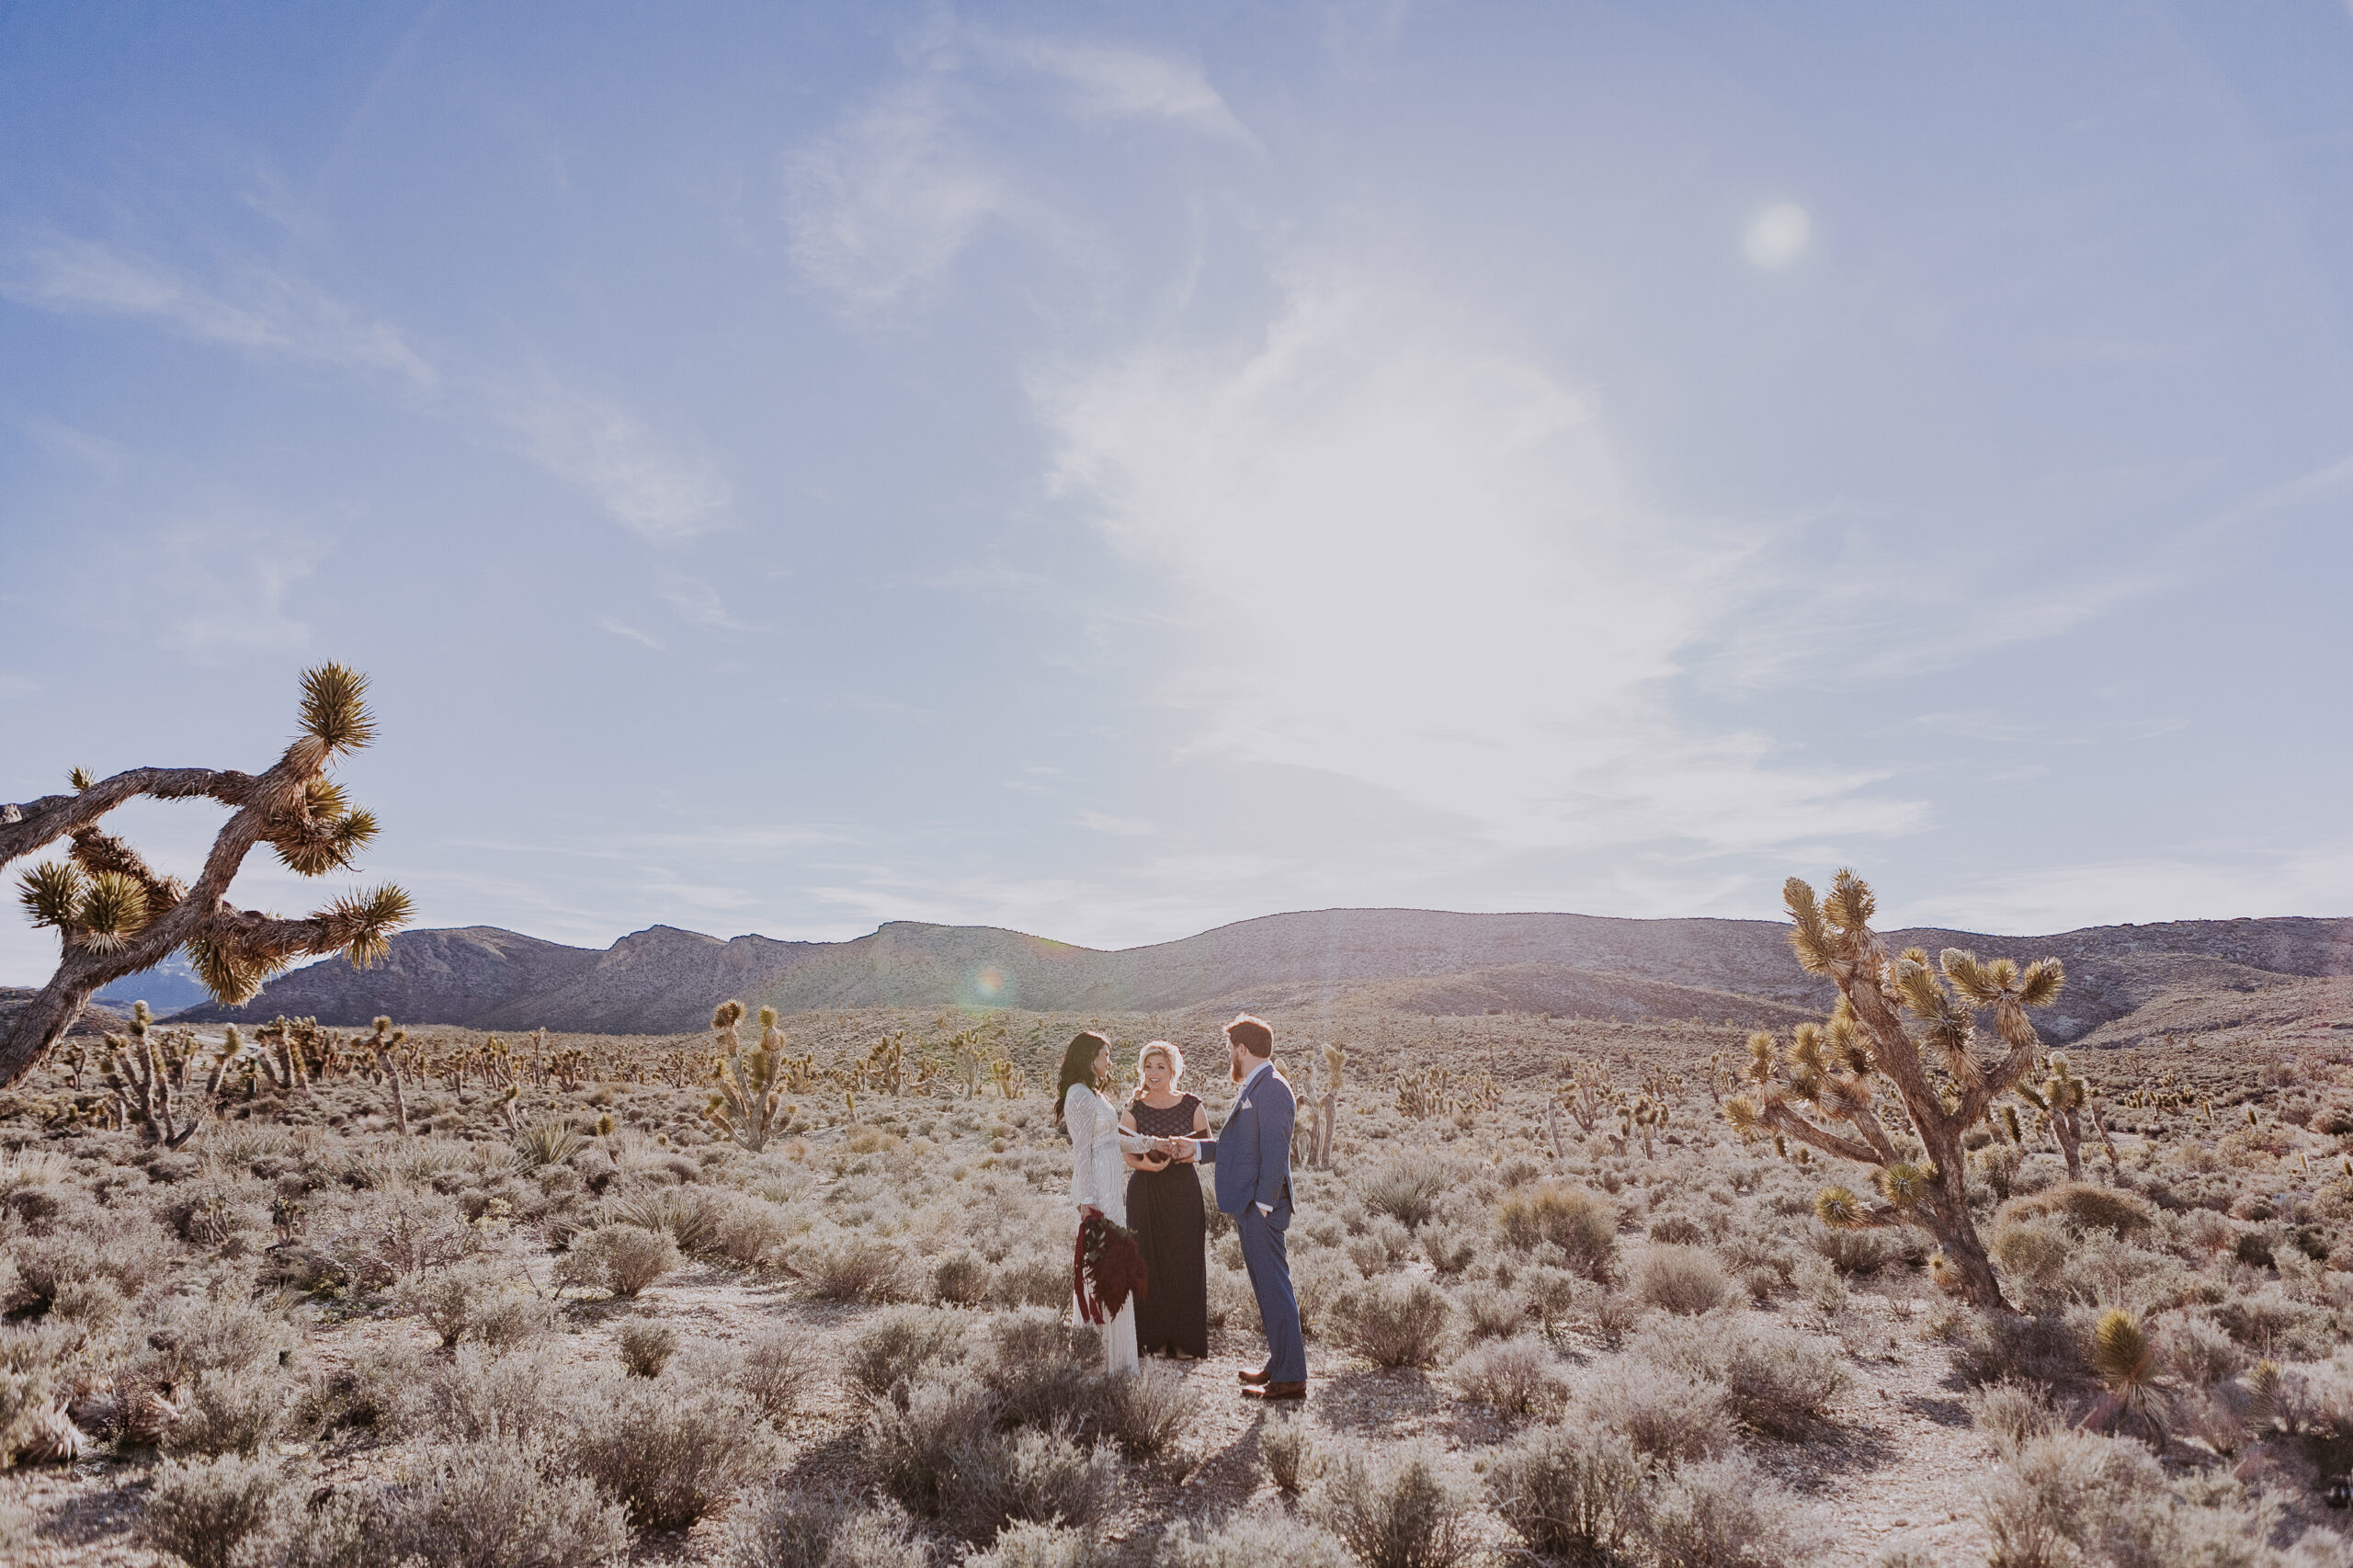 A bride and groom stand in the desert with their officiant surrounded by Joshua trees, during their desert elopement ceremony.